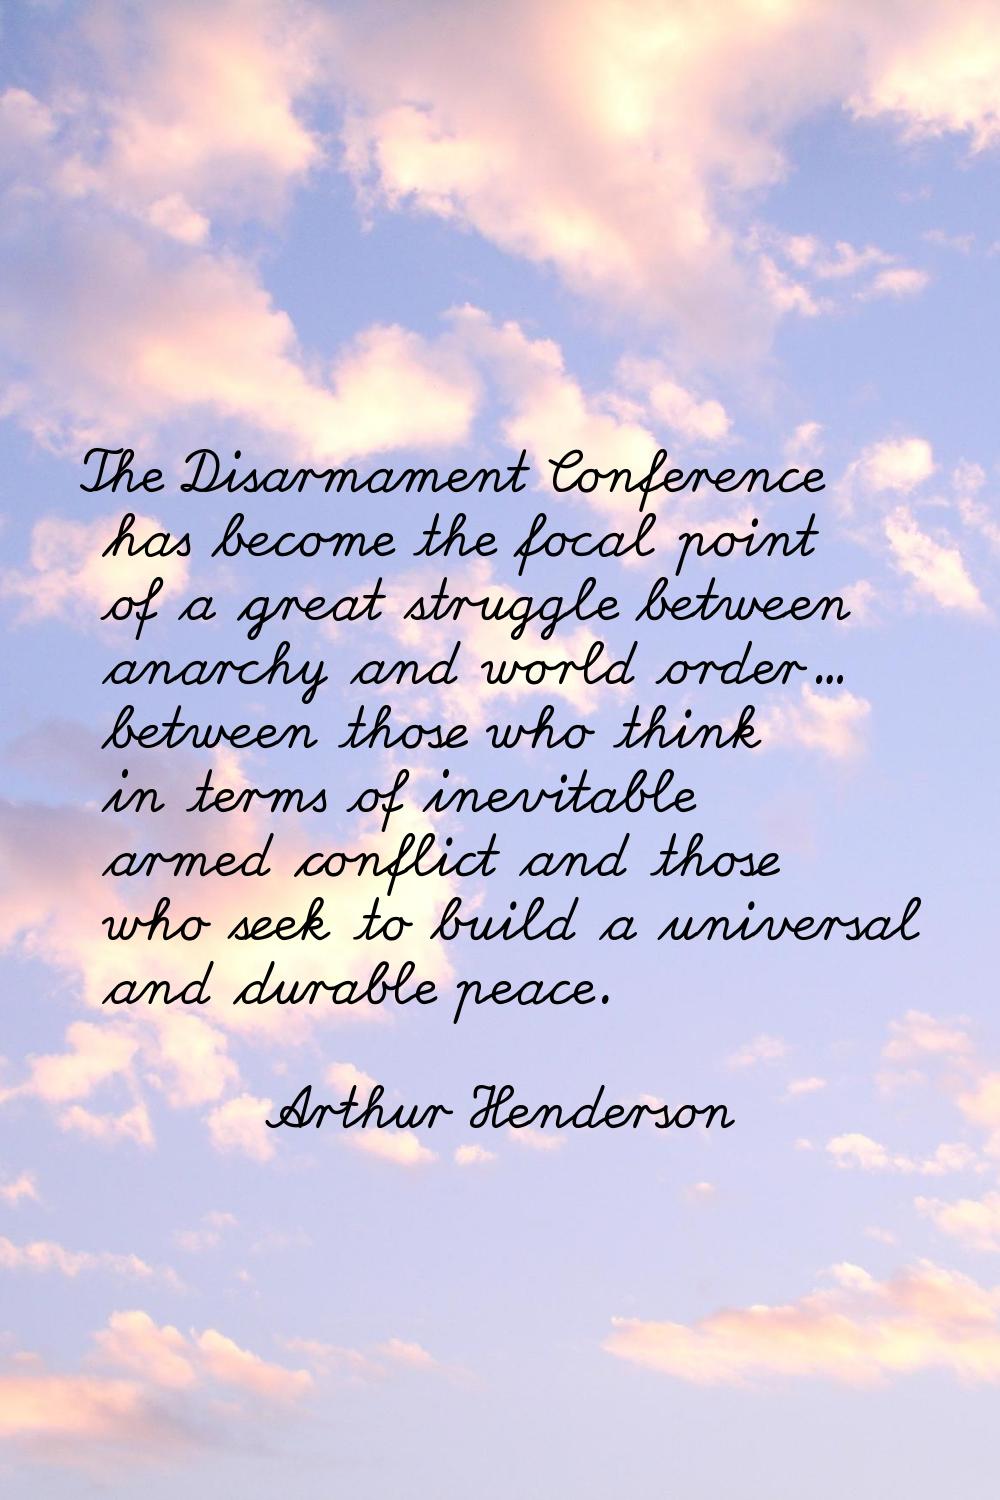 The Disarmament Conference has become the focal point of a great struggle between anarchy and world